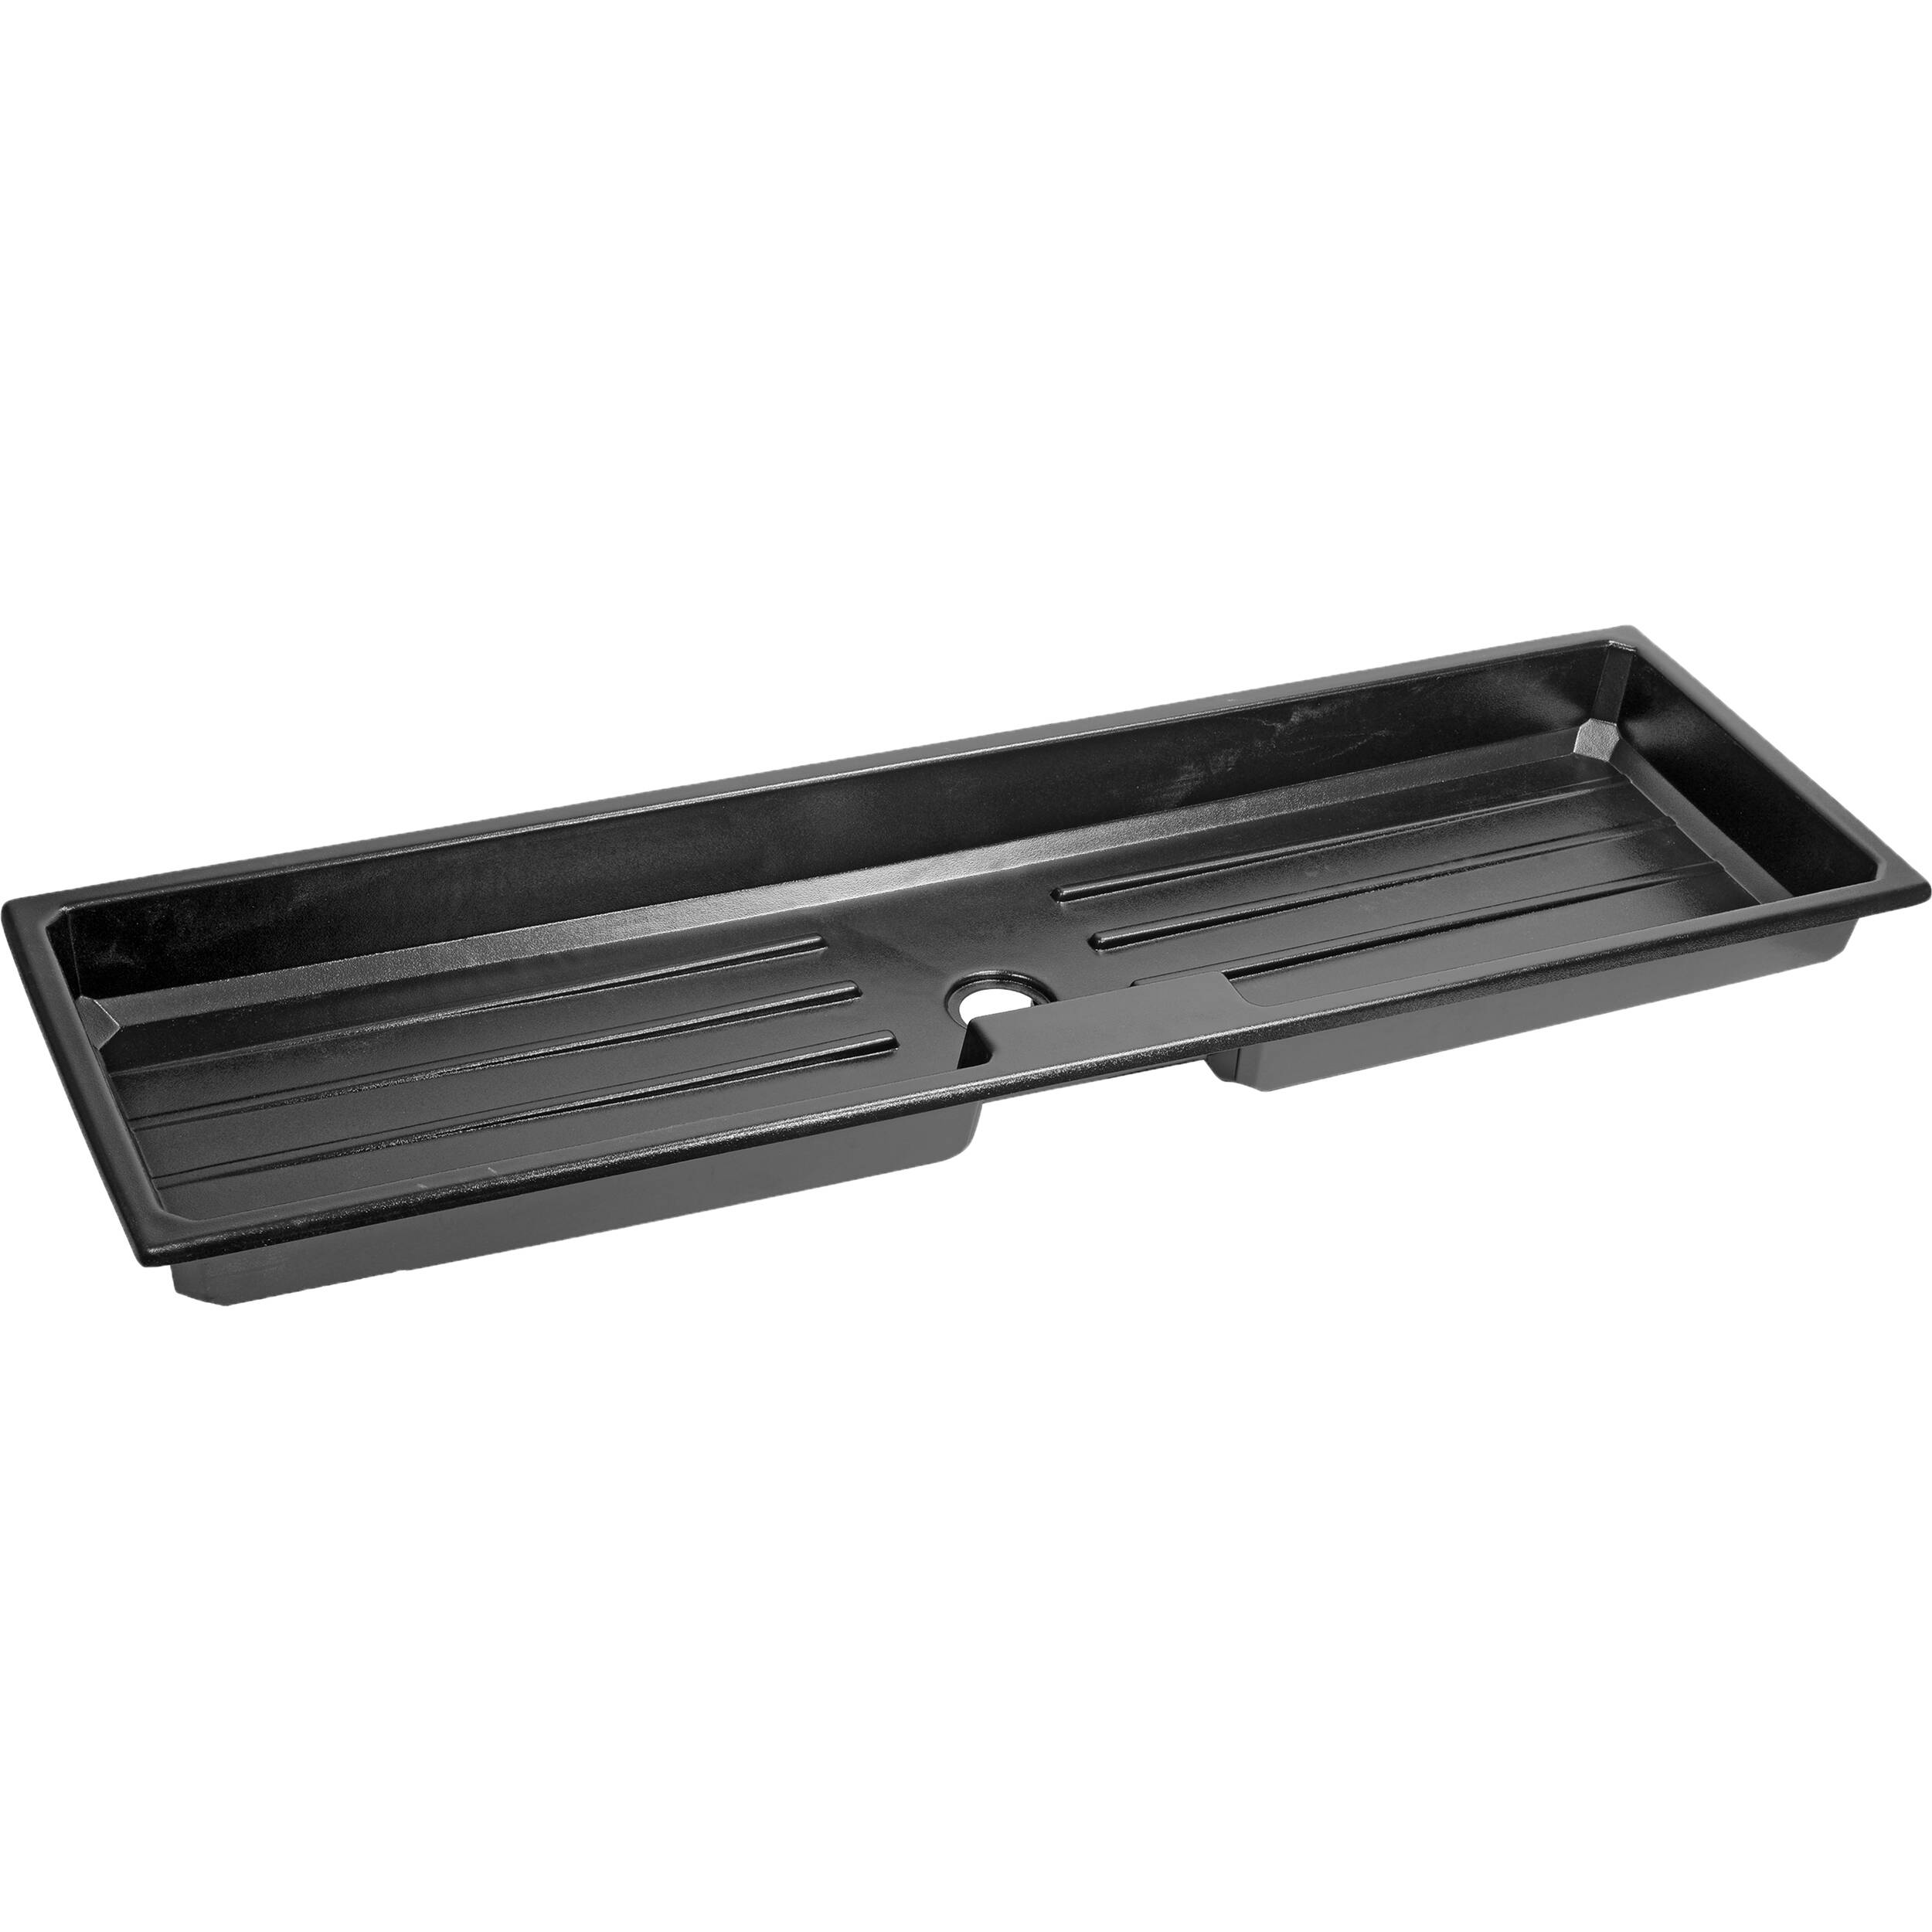 Delta 1 6 Foot Commercial Abs Plastic Sink Black Holds 2 16x20 Trays 72x22x5